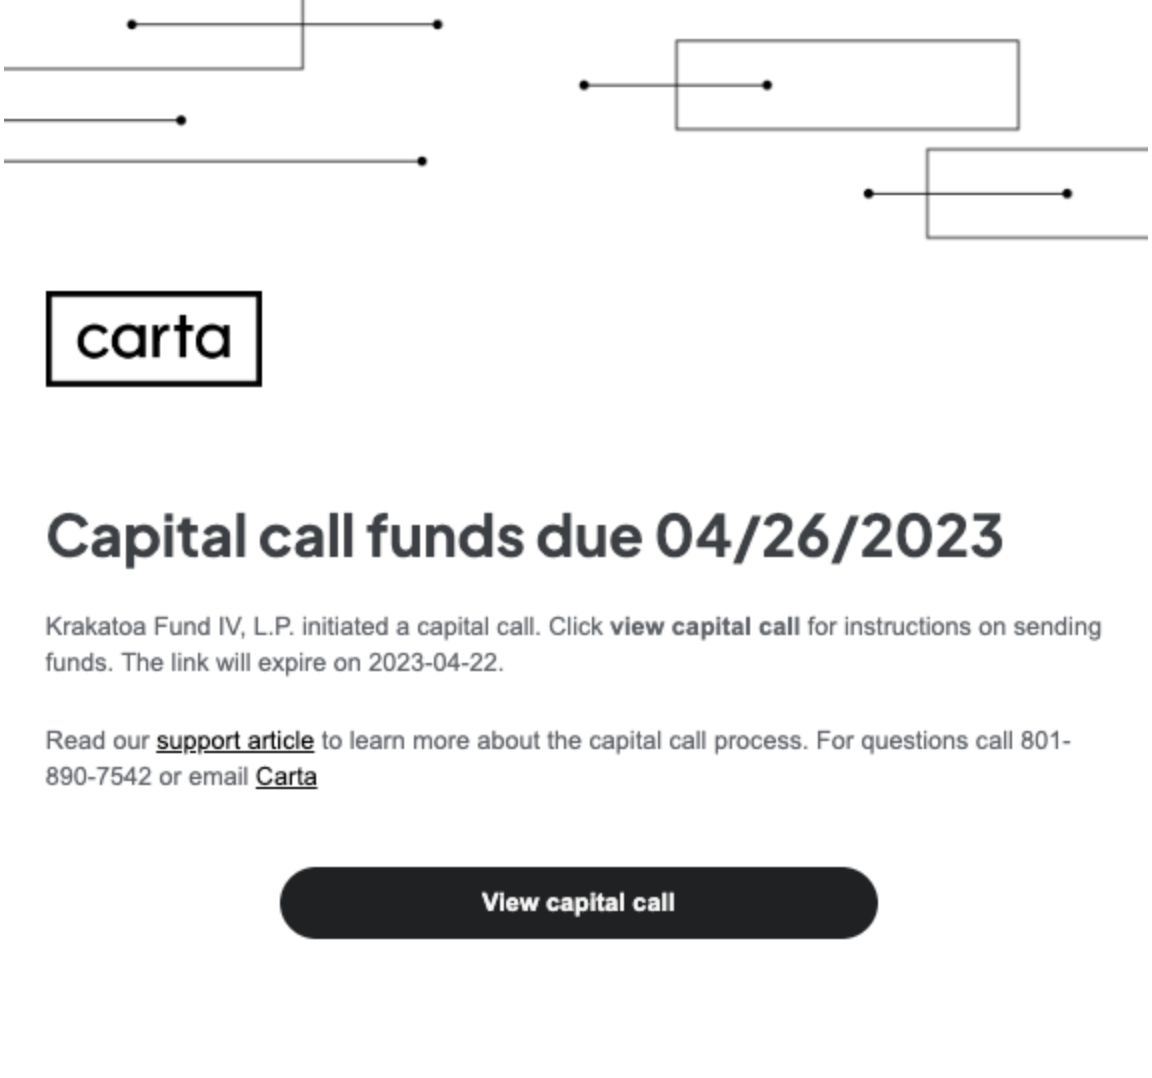 Completing a Capital Call